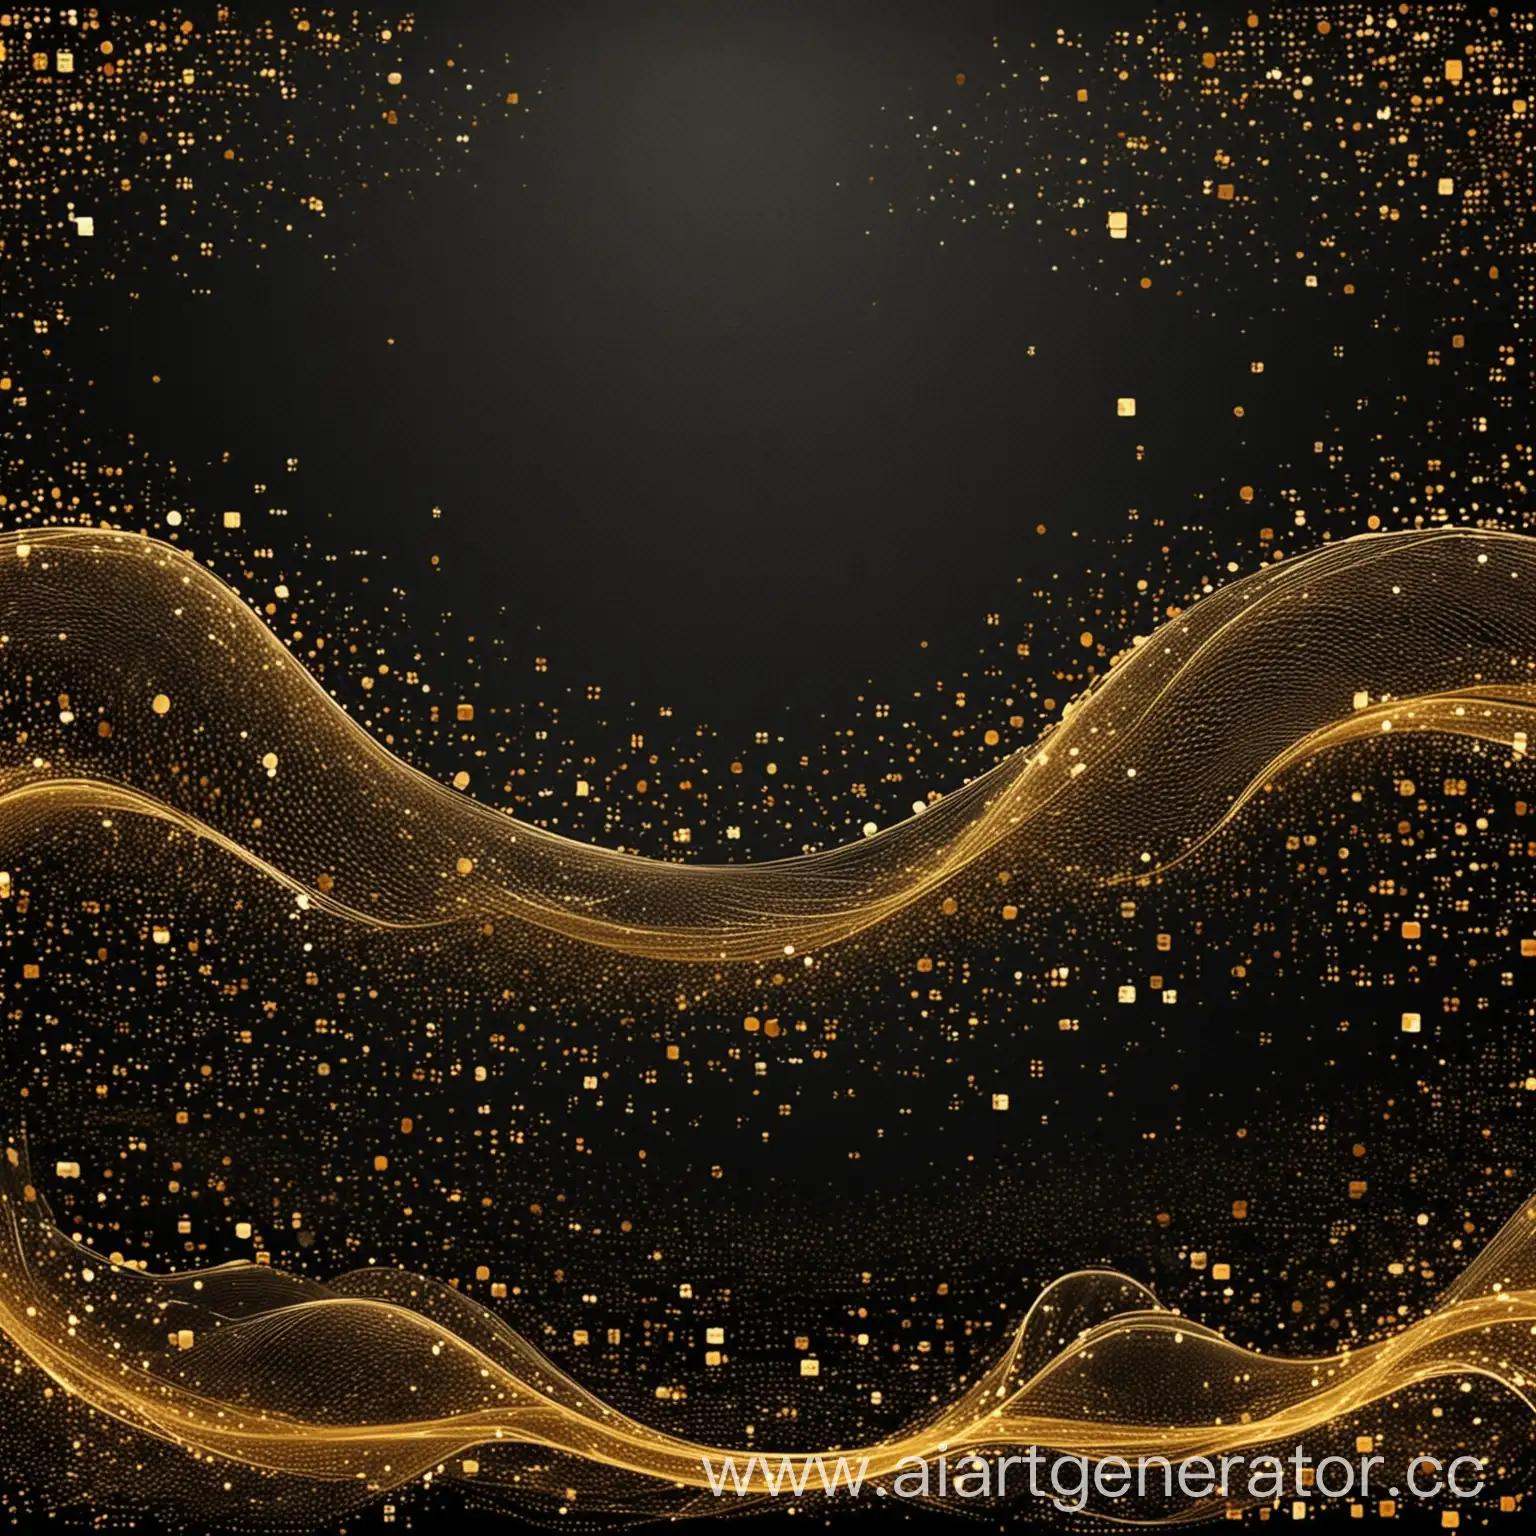 Elegant-Dark-Background-with-Golden-Geometric-Shapes-and-Waves-of-Light